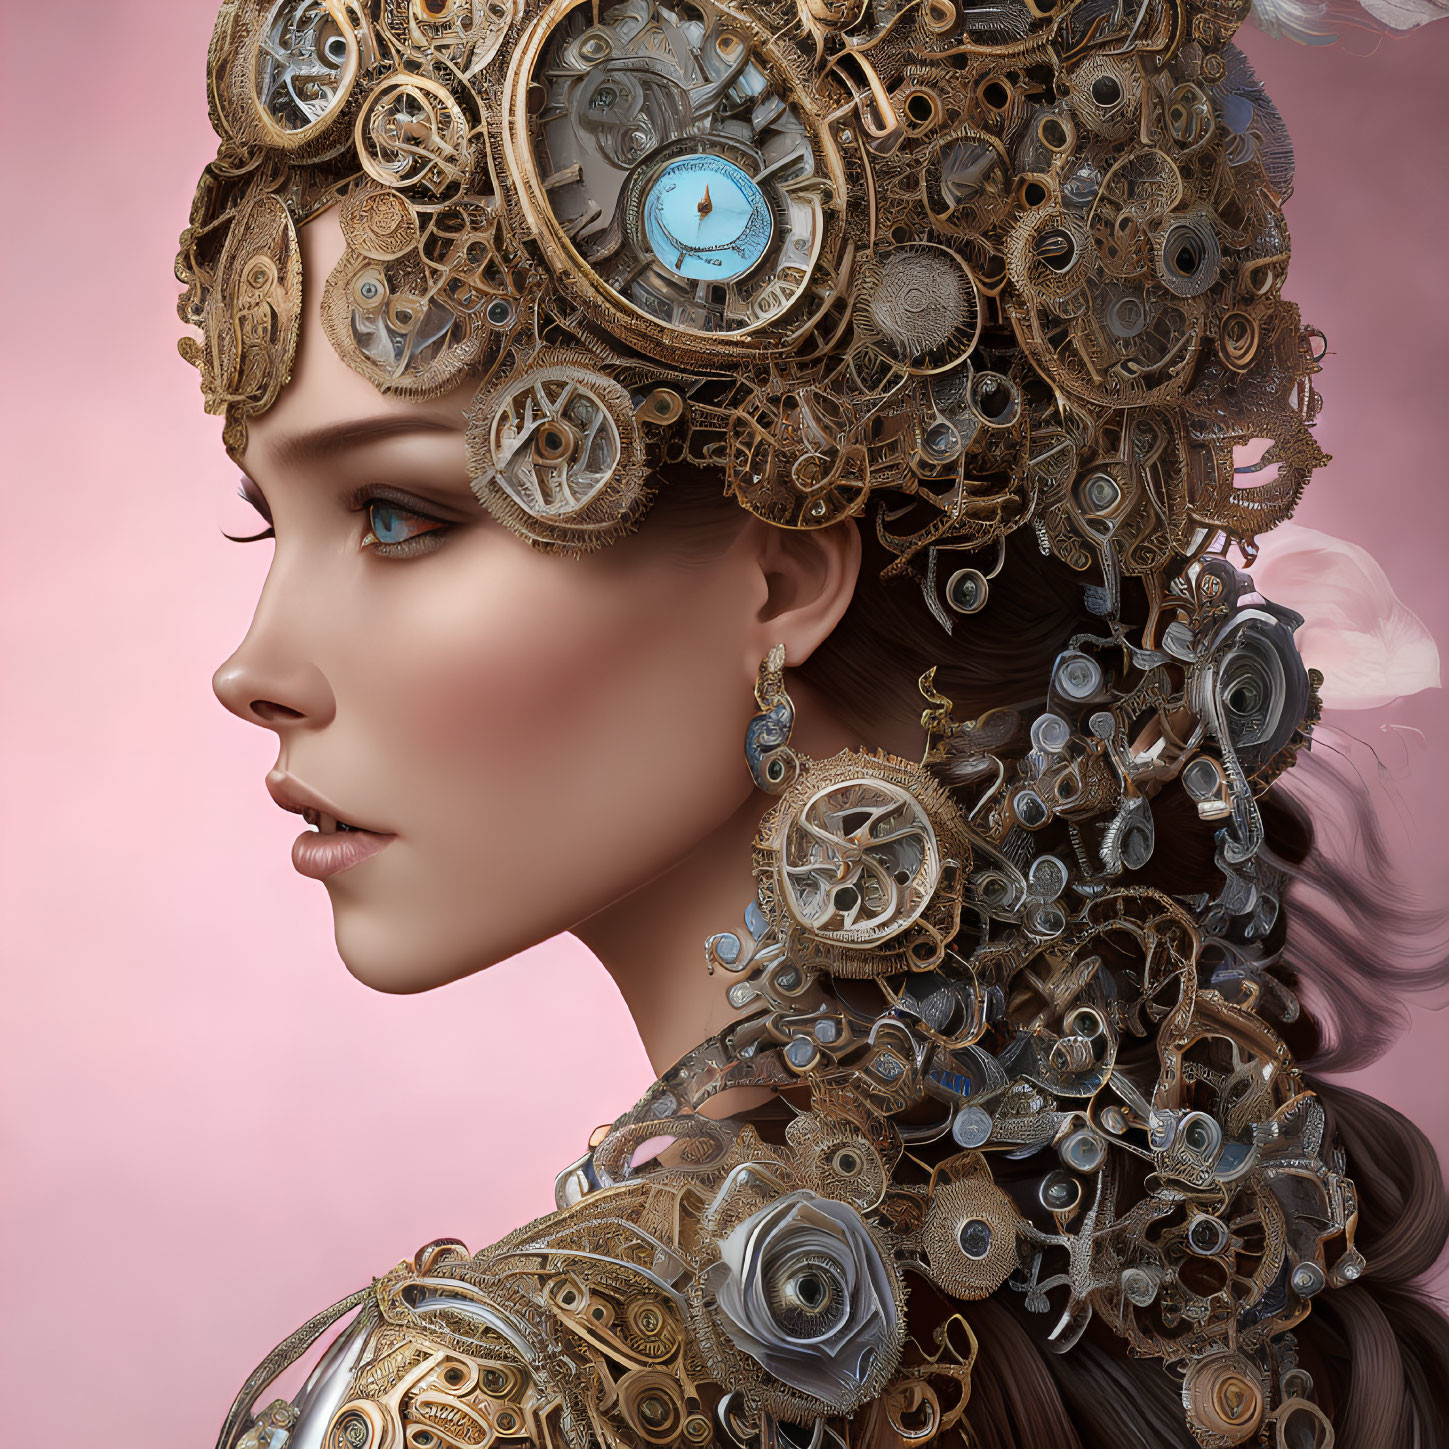 Steampunk-inspired woman with clock headgear on pink background